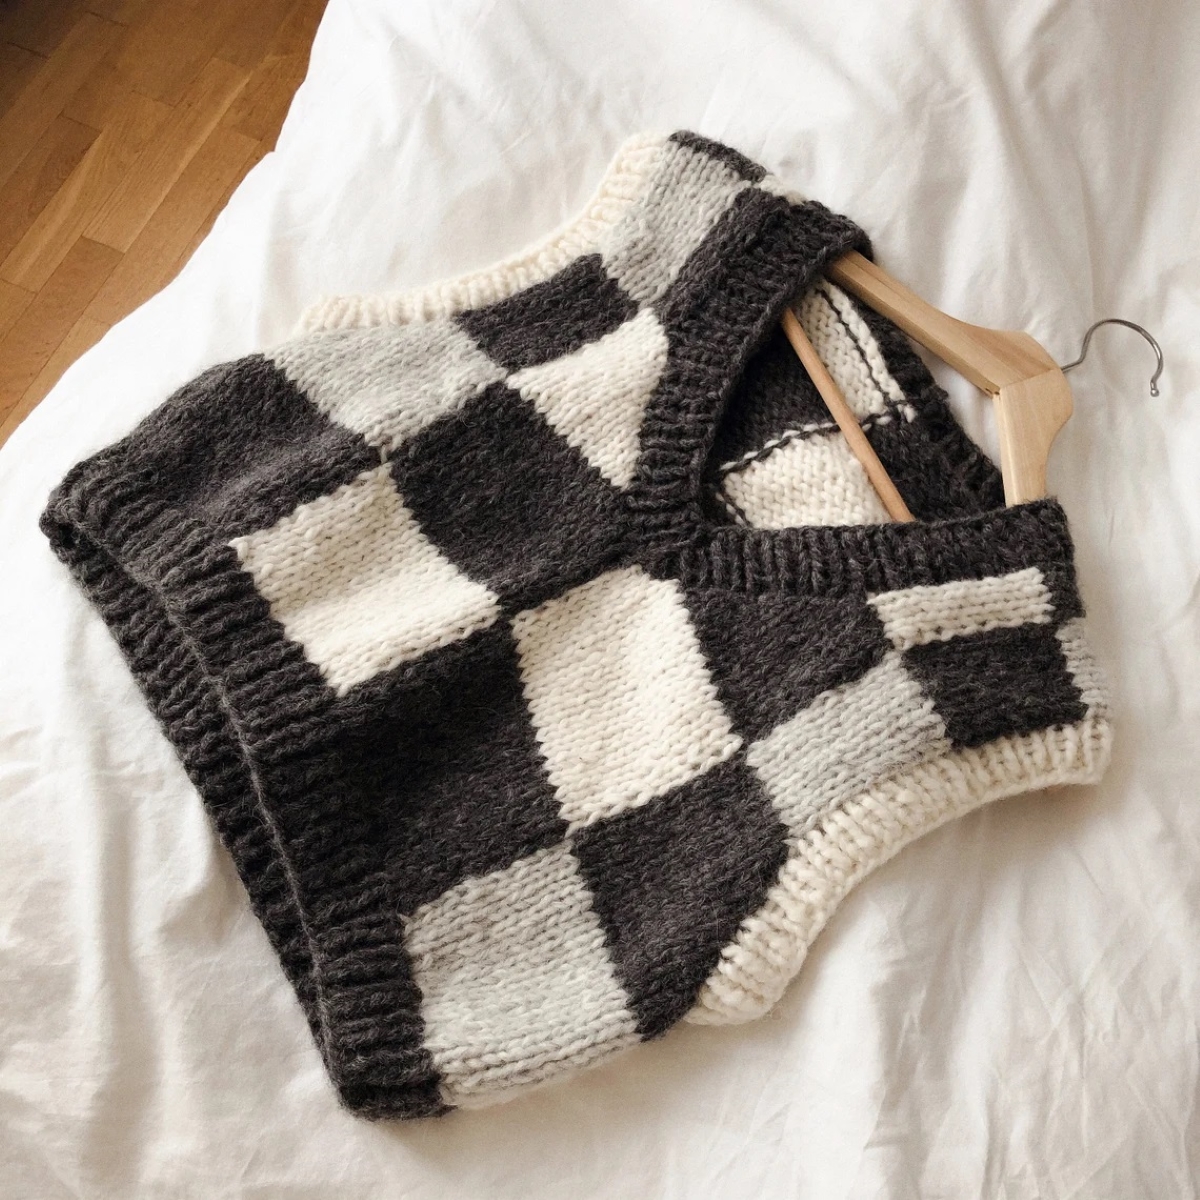 knitting patterns for beginners - knitted checkered sweater vest